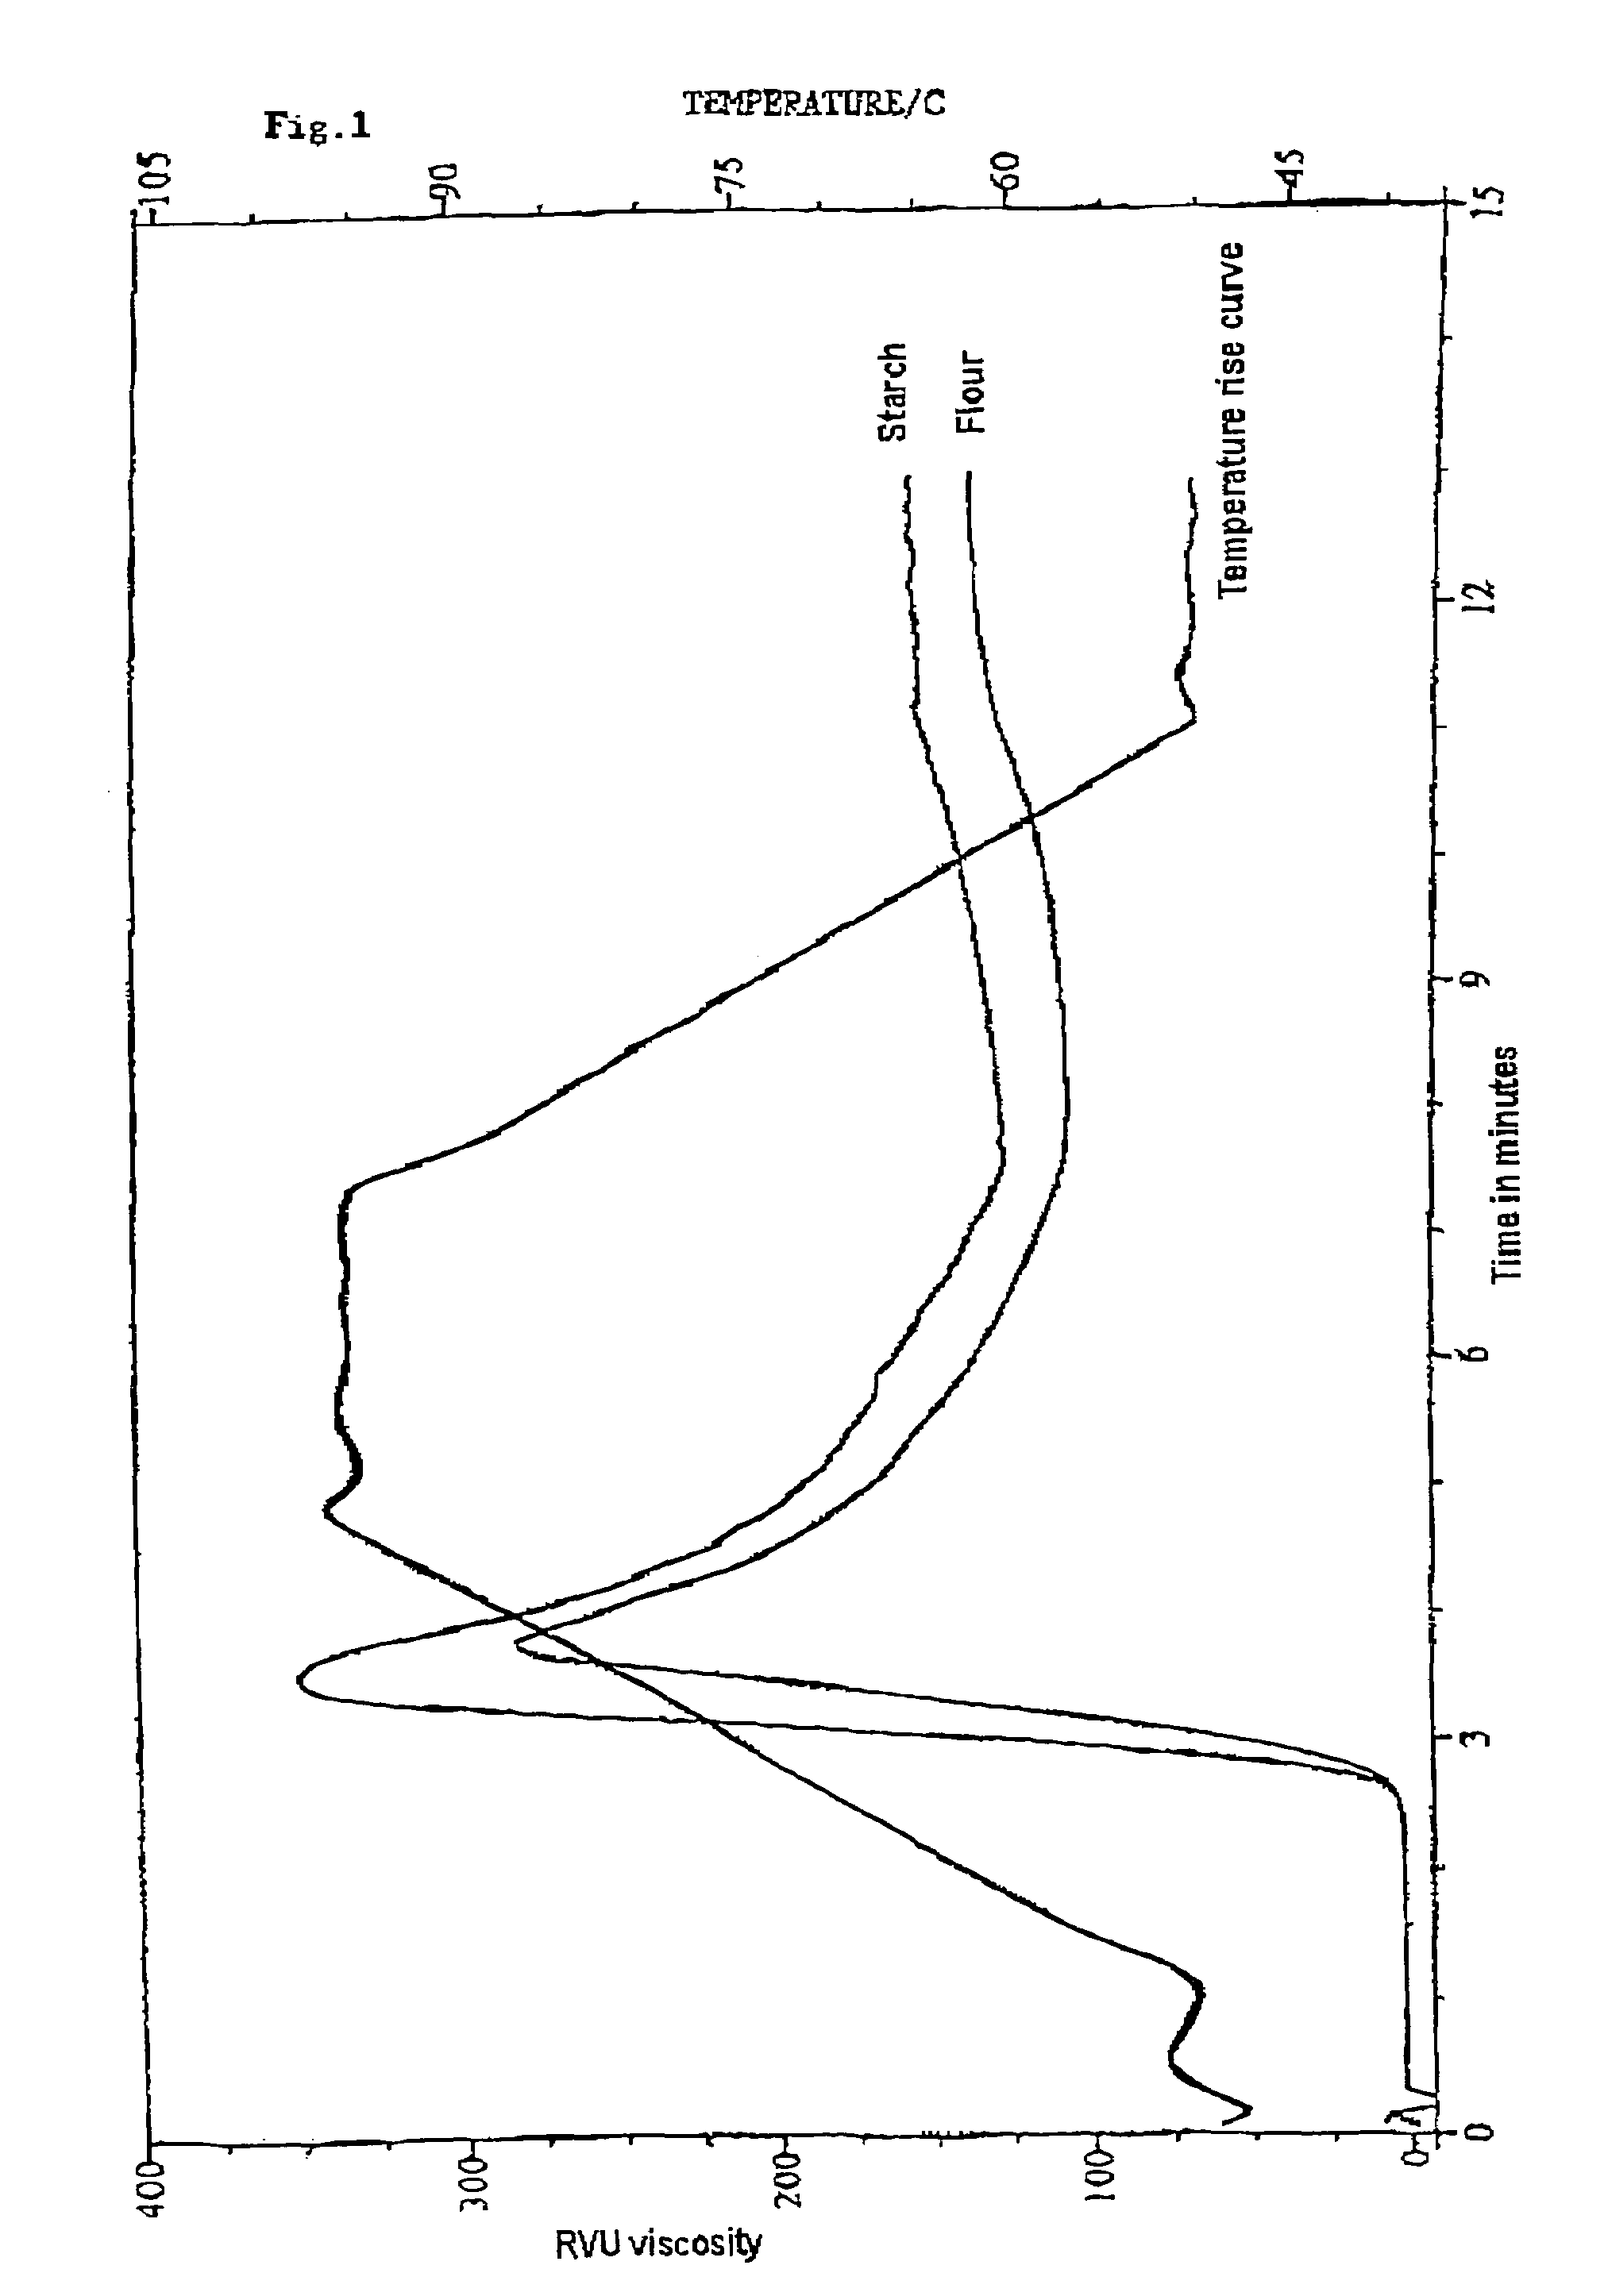 Flours and starch with a very high amylopectin content and methods for the production and uses thereof